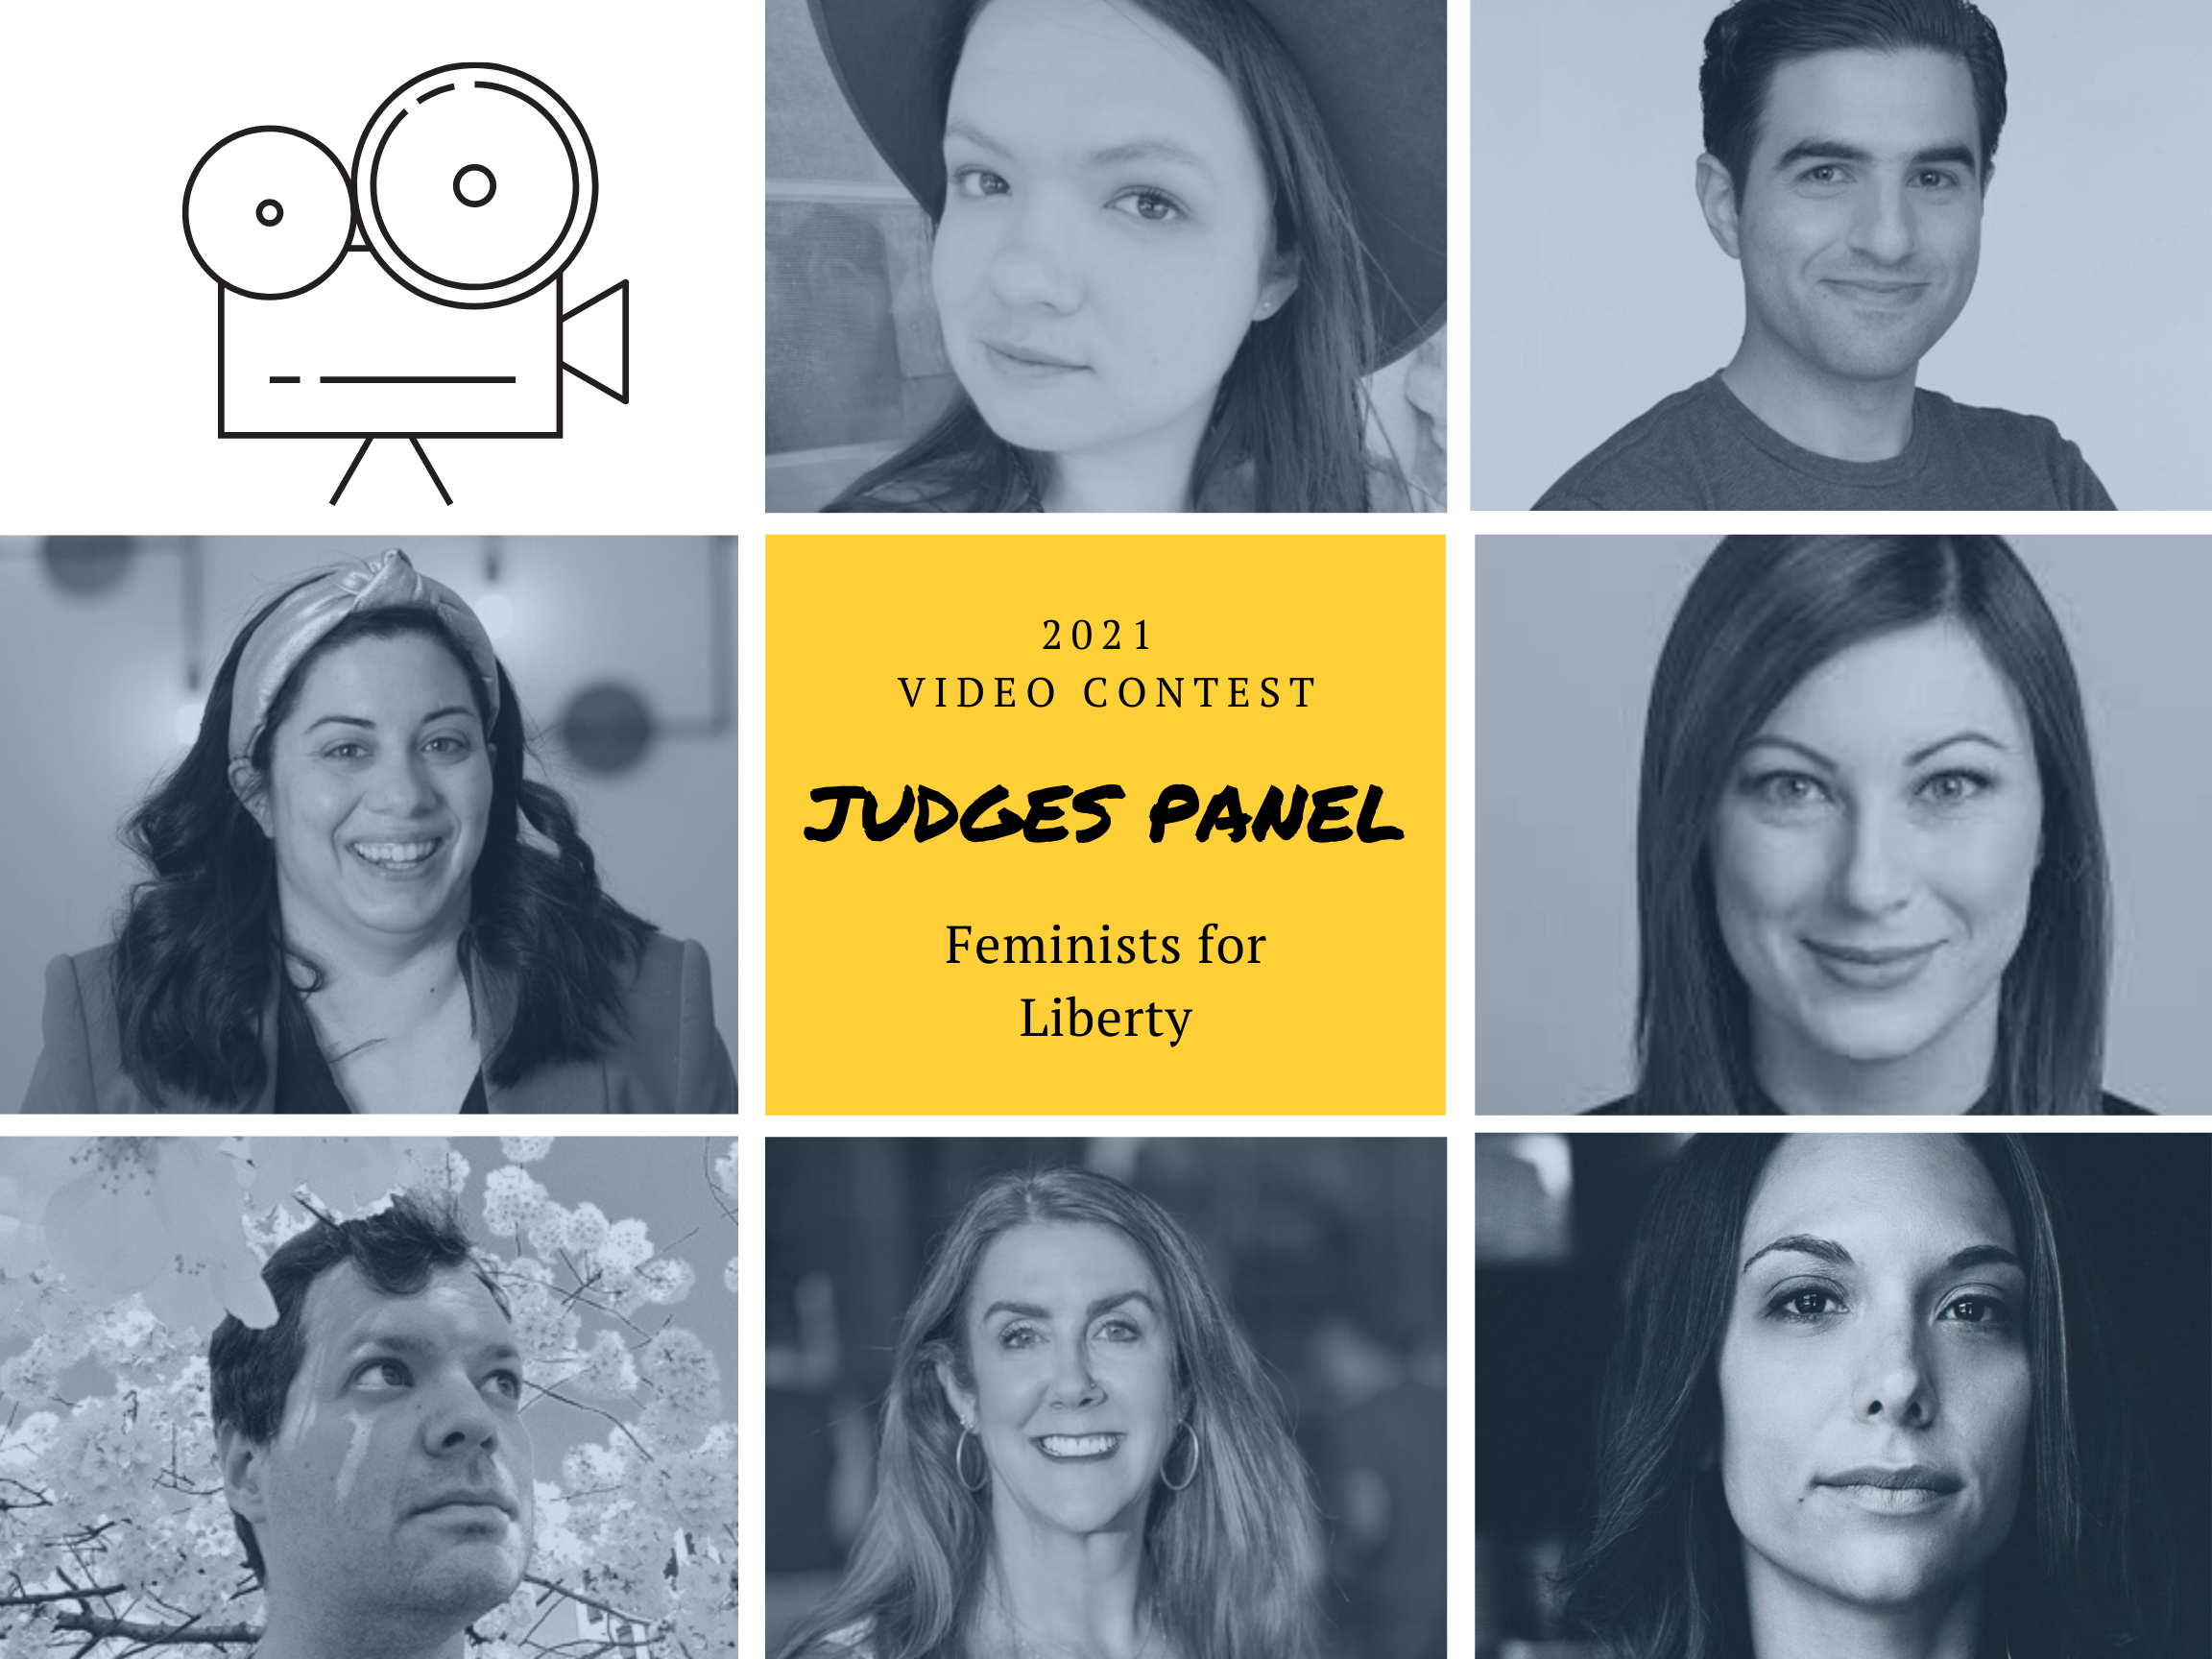 Introducing Judges for the 2021 Video Contest